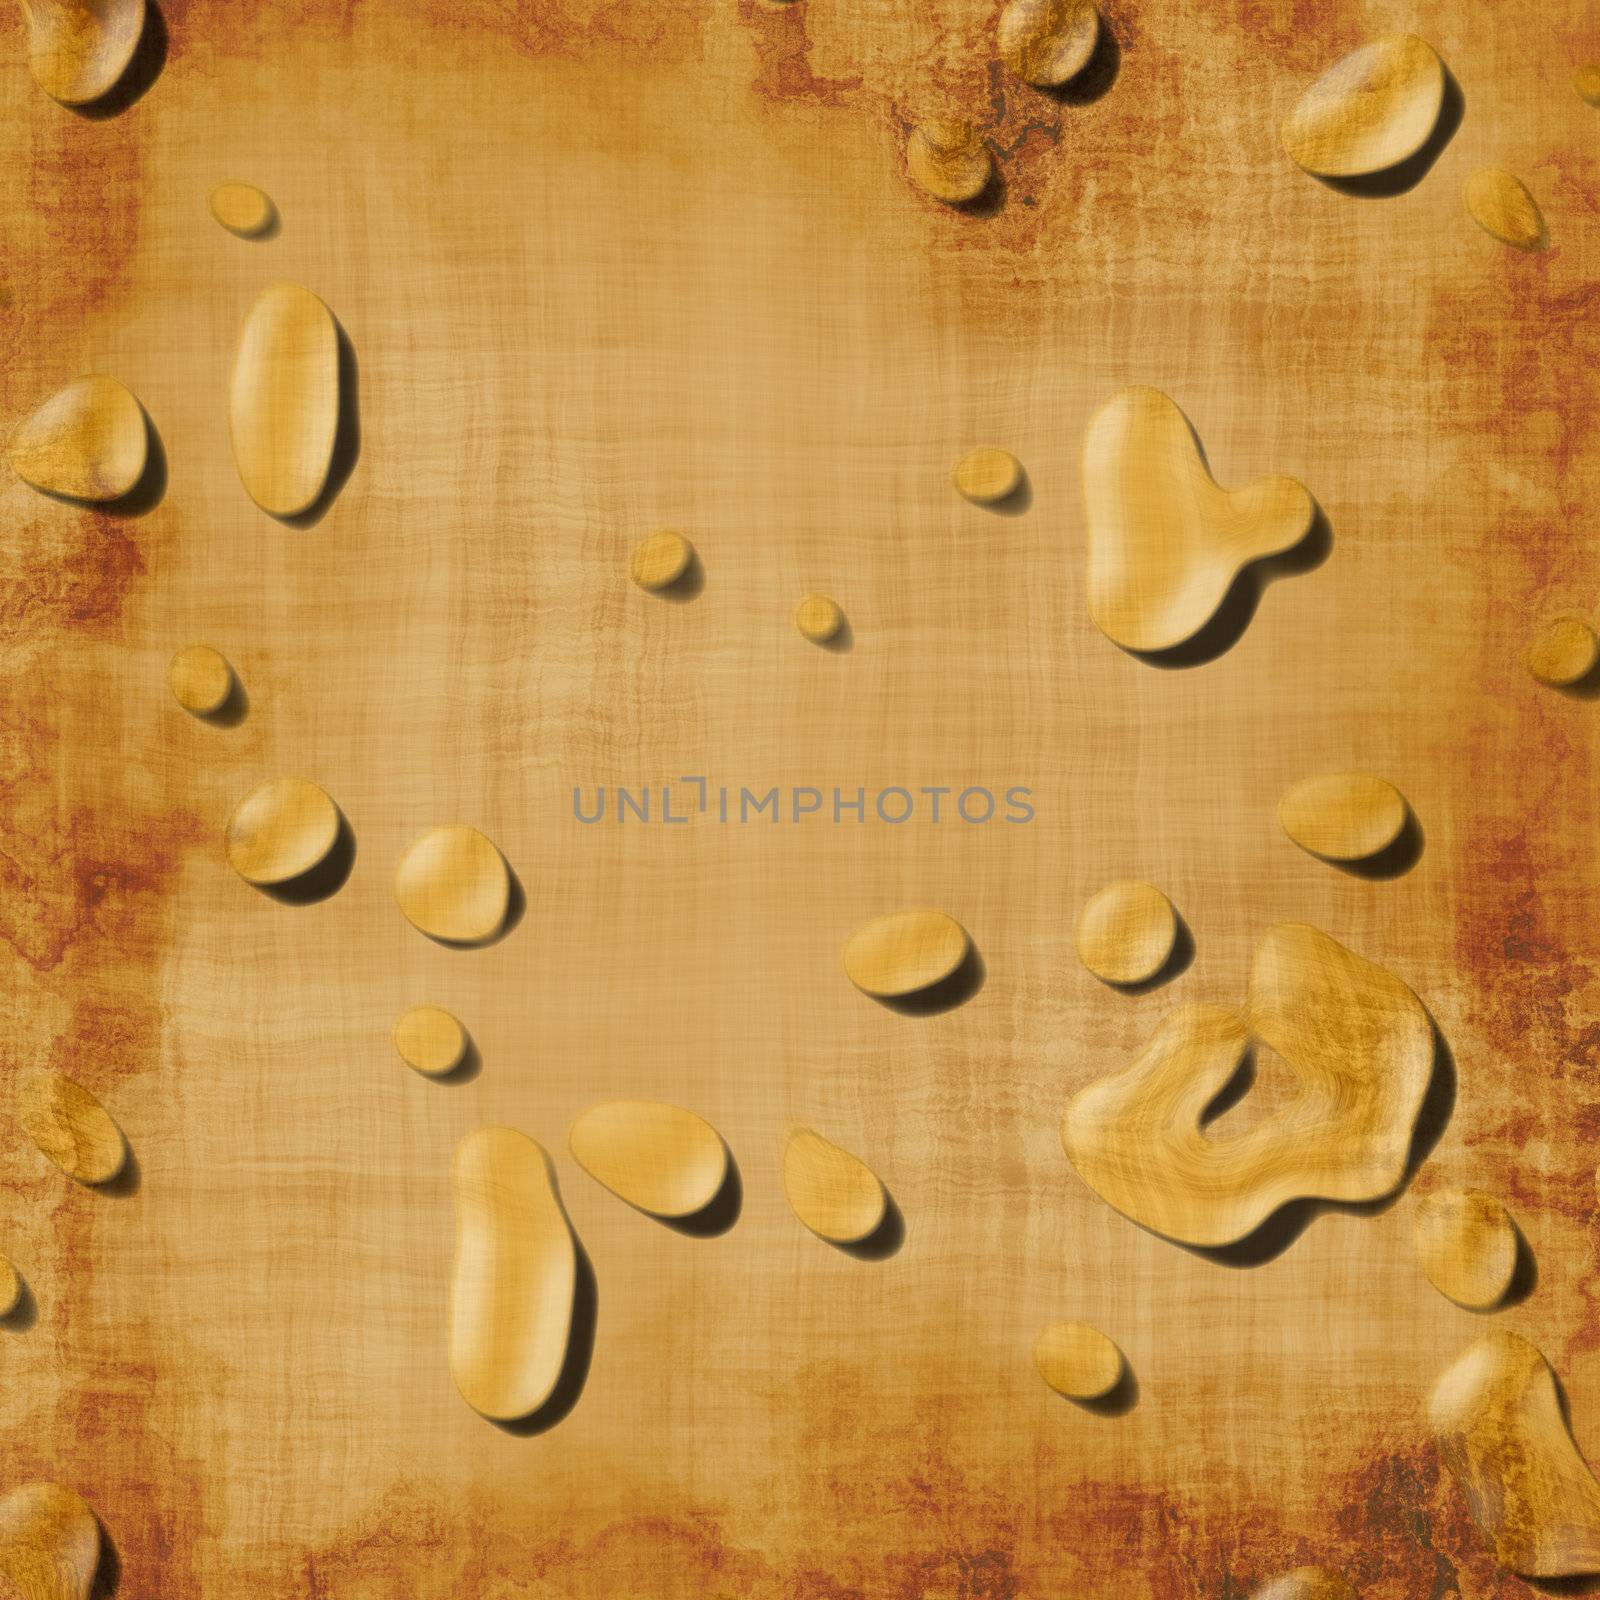 a large image of old and worn fabric or paper with water drops splashed on it